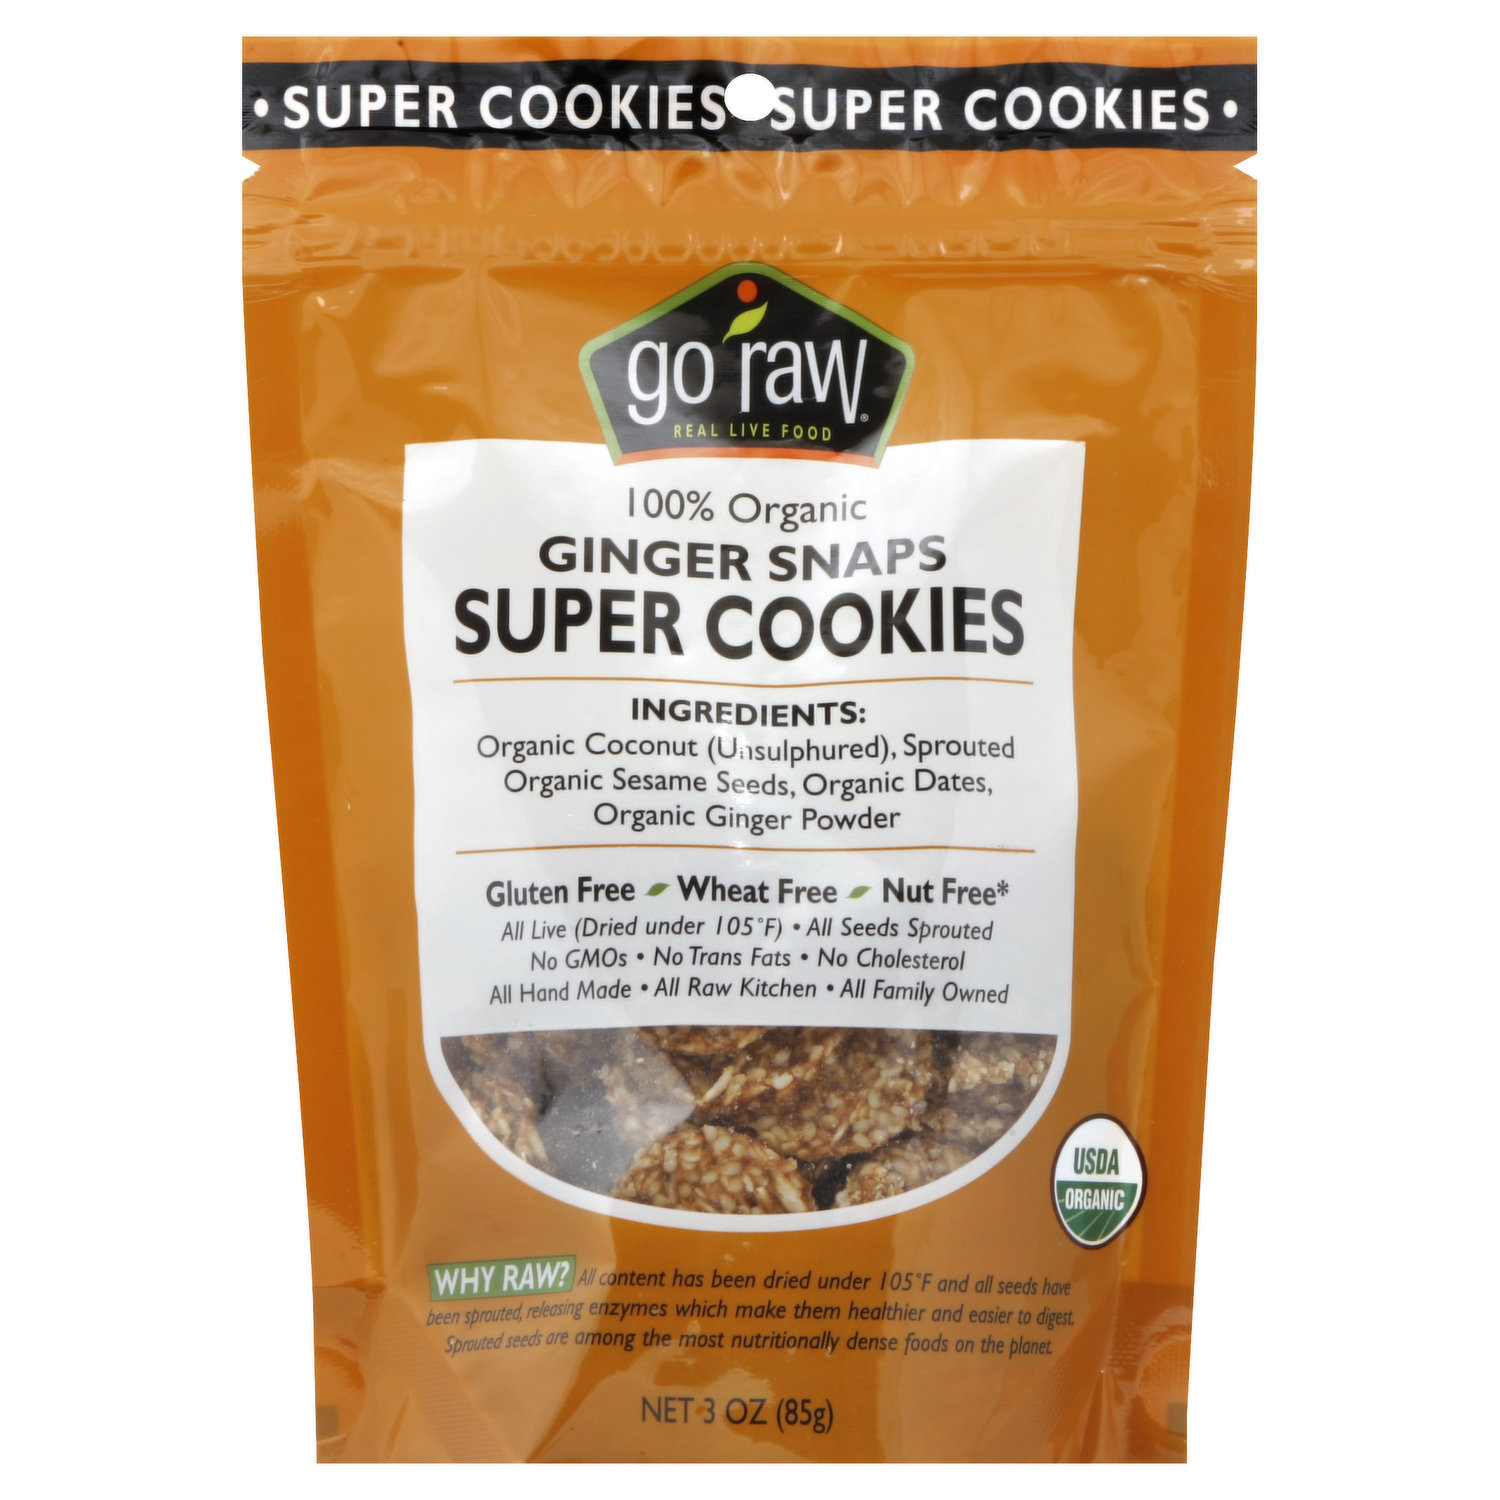 Coco-Coconut Sprouted Crisps - Organic, Gluten-Free – Foods Alive Inc.